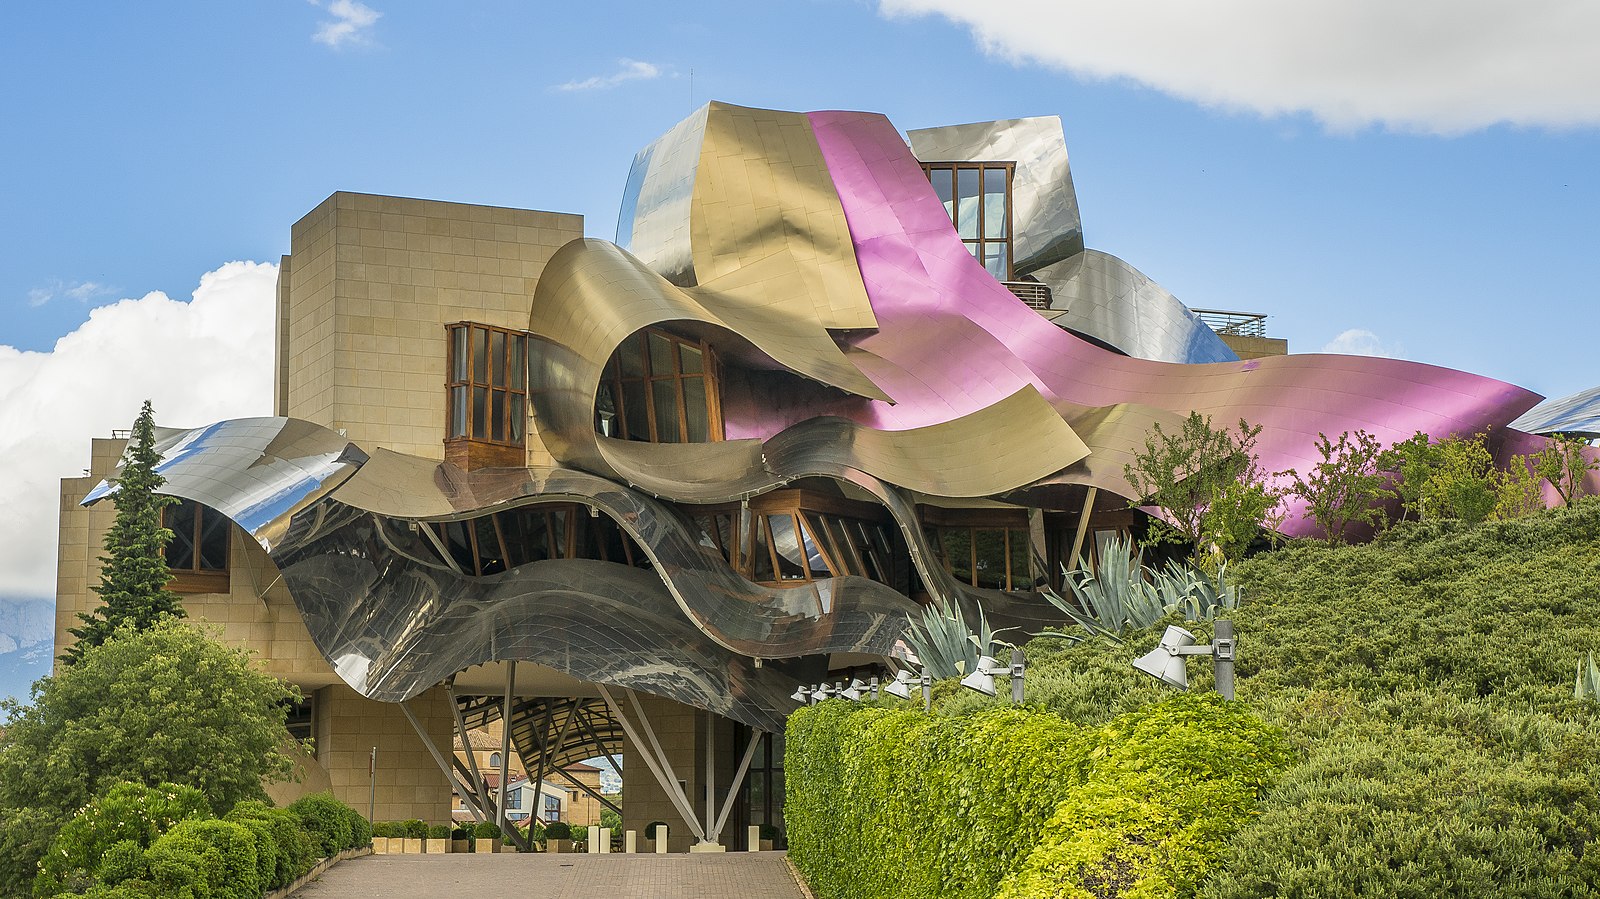 A winery with a stone building and a curvy metal roof in purple and gold colors